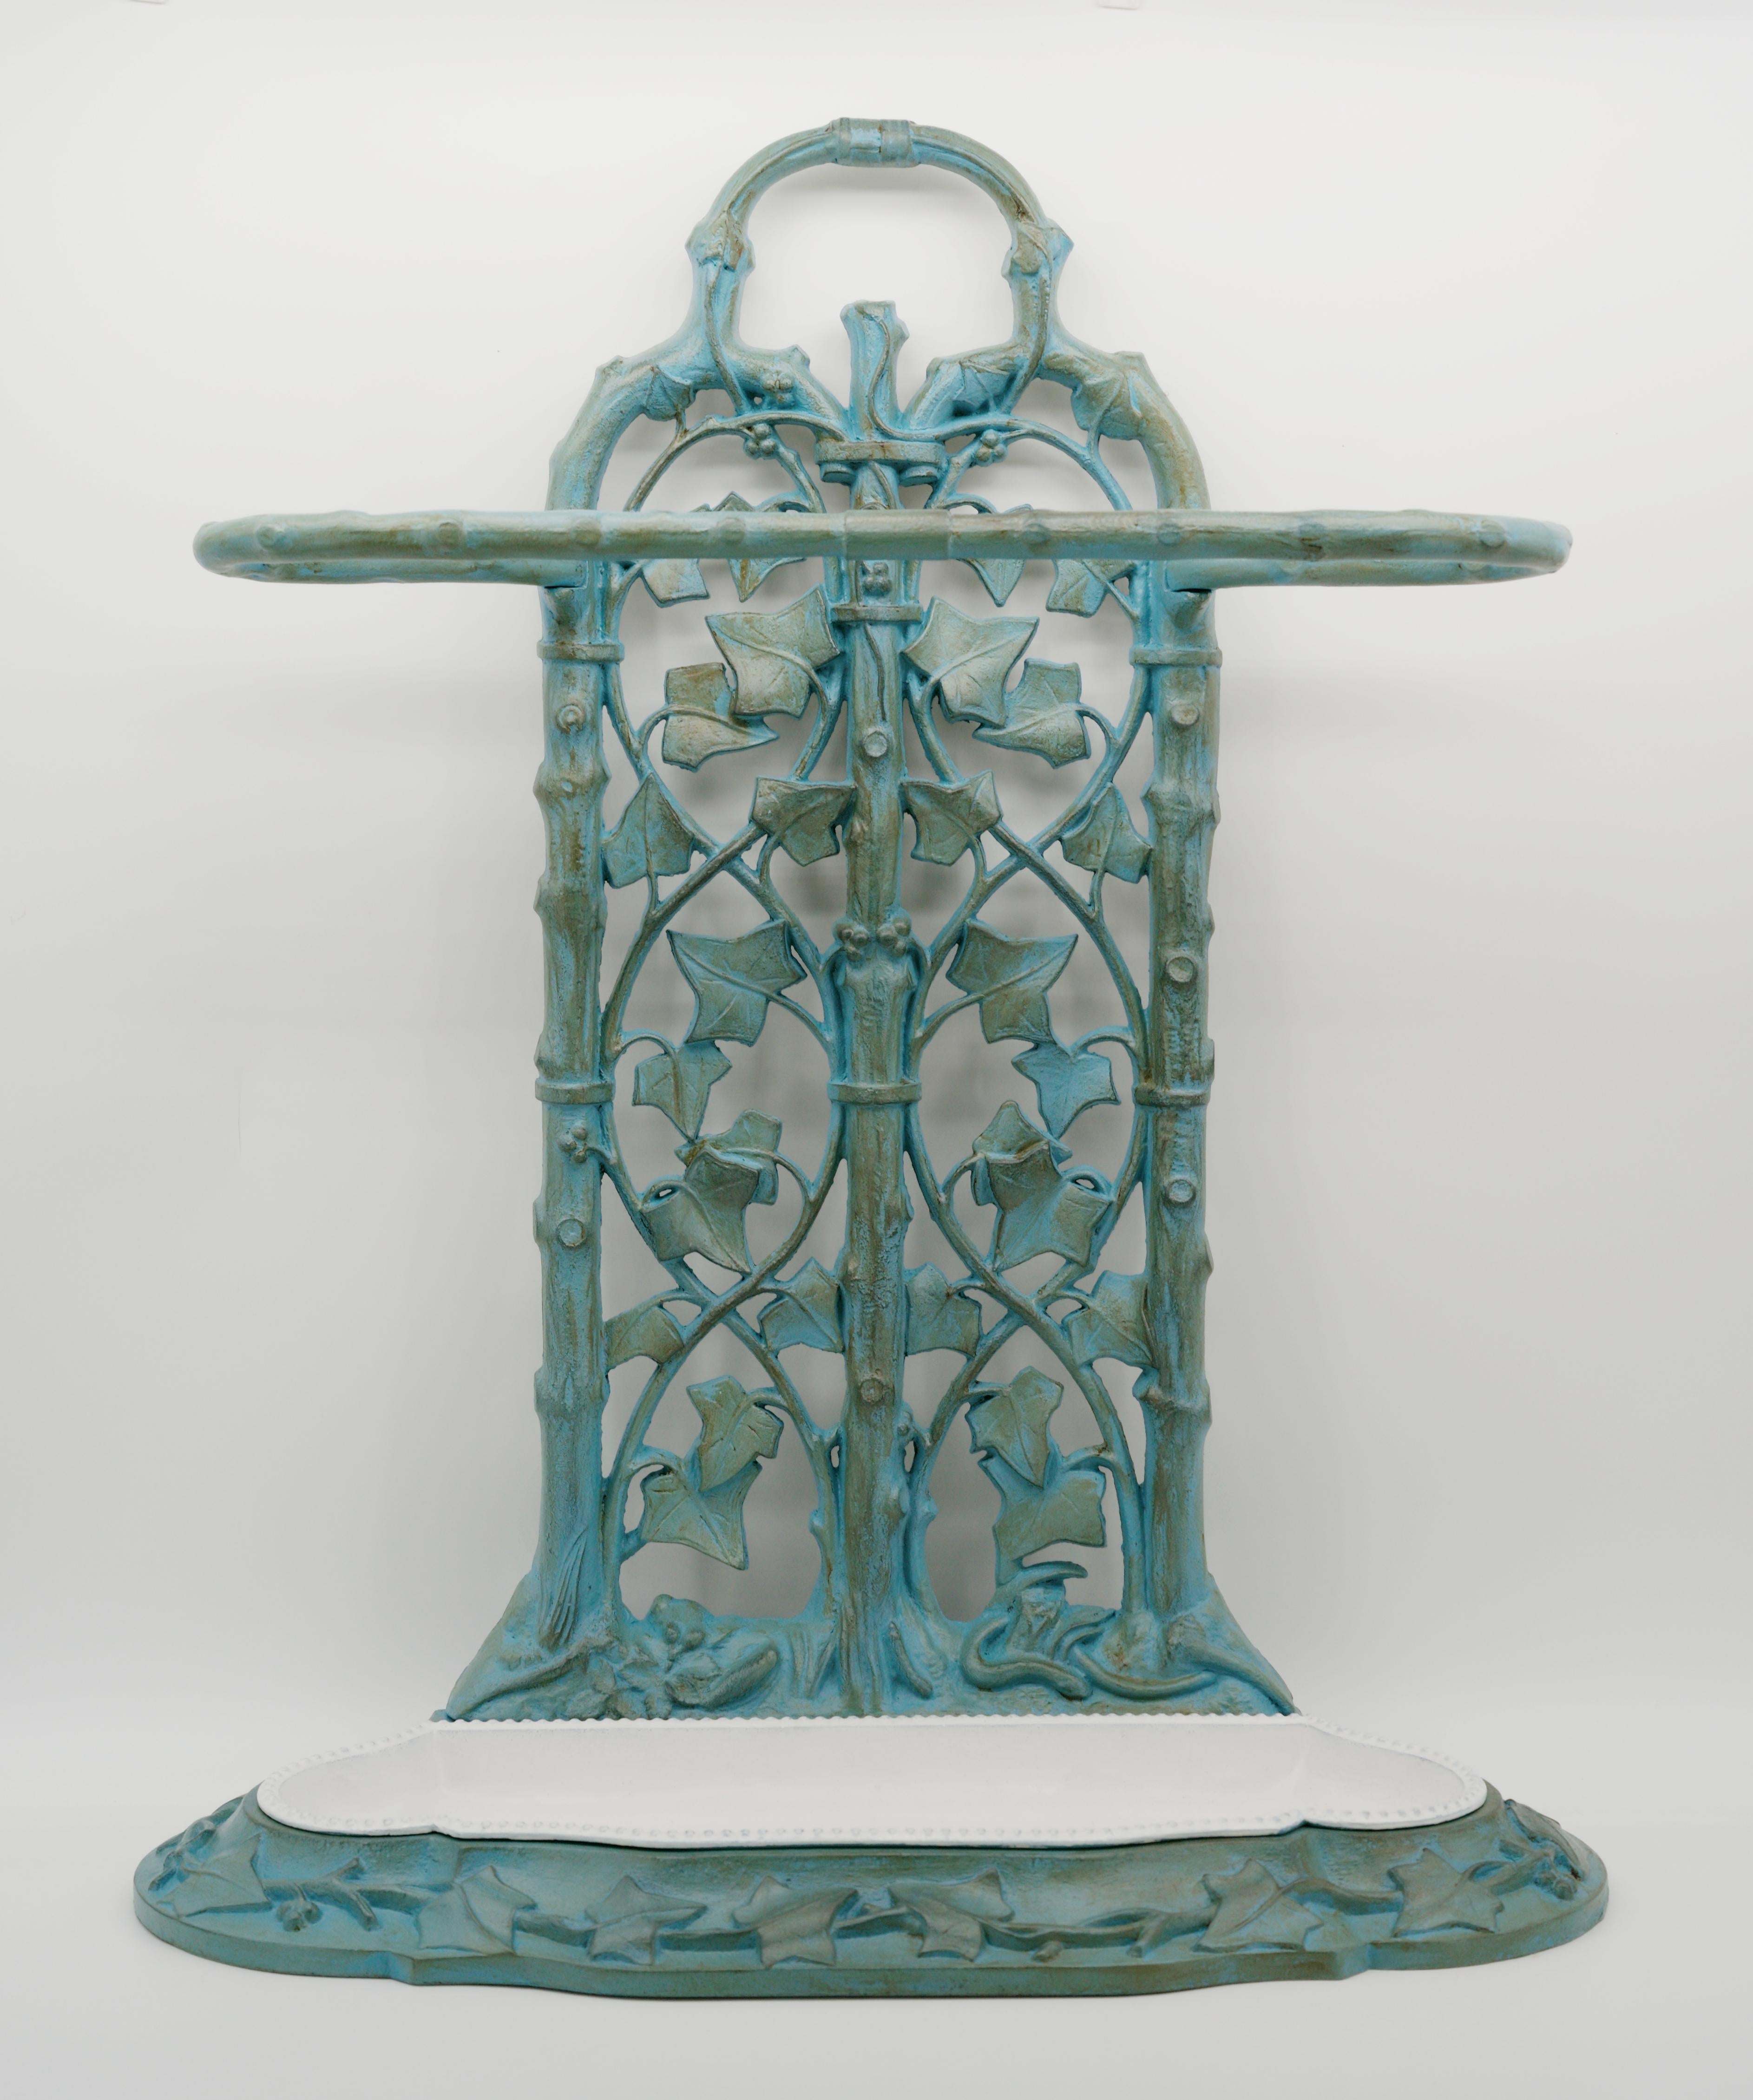 French Art Nouveau umbrella stand, France, ca.1900. Patinated cast iron. Removable tank. Height: 28.7